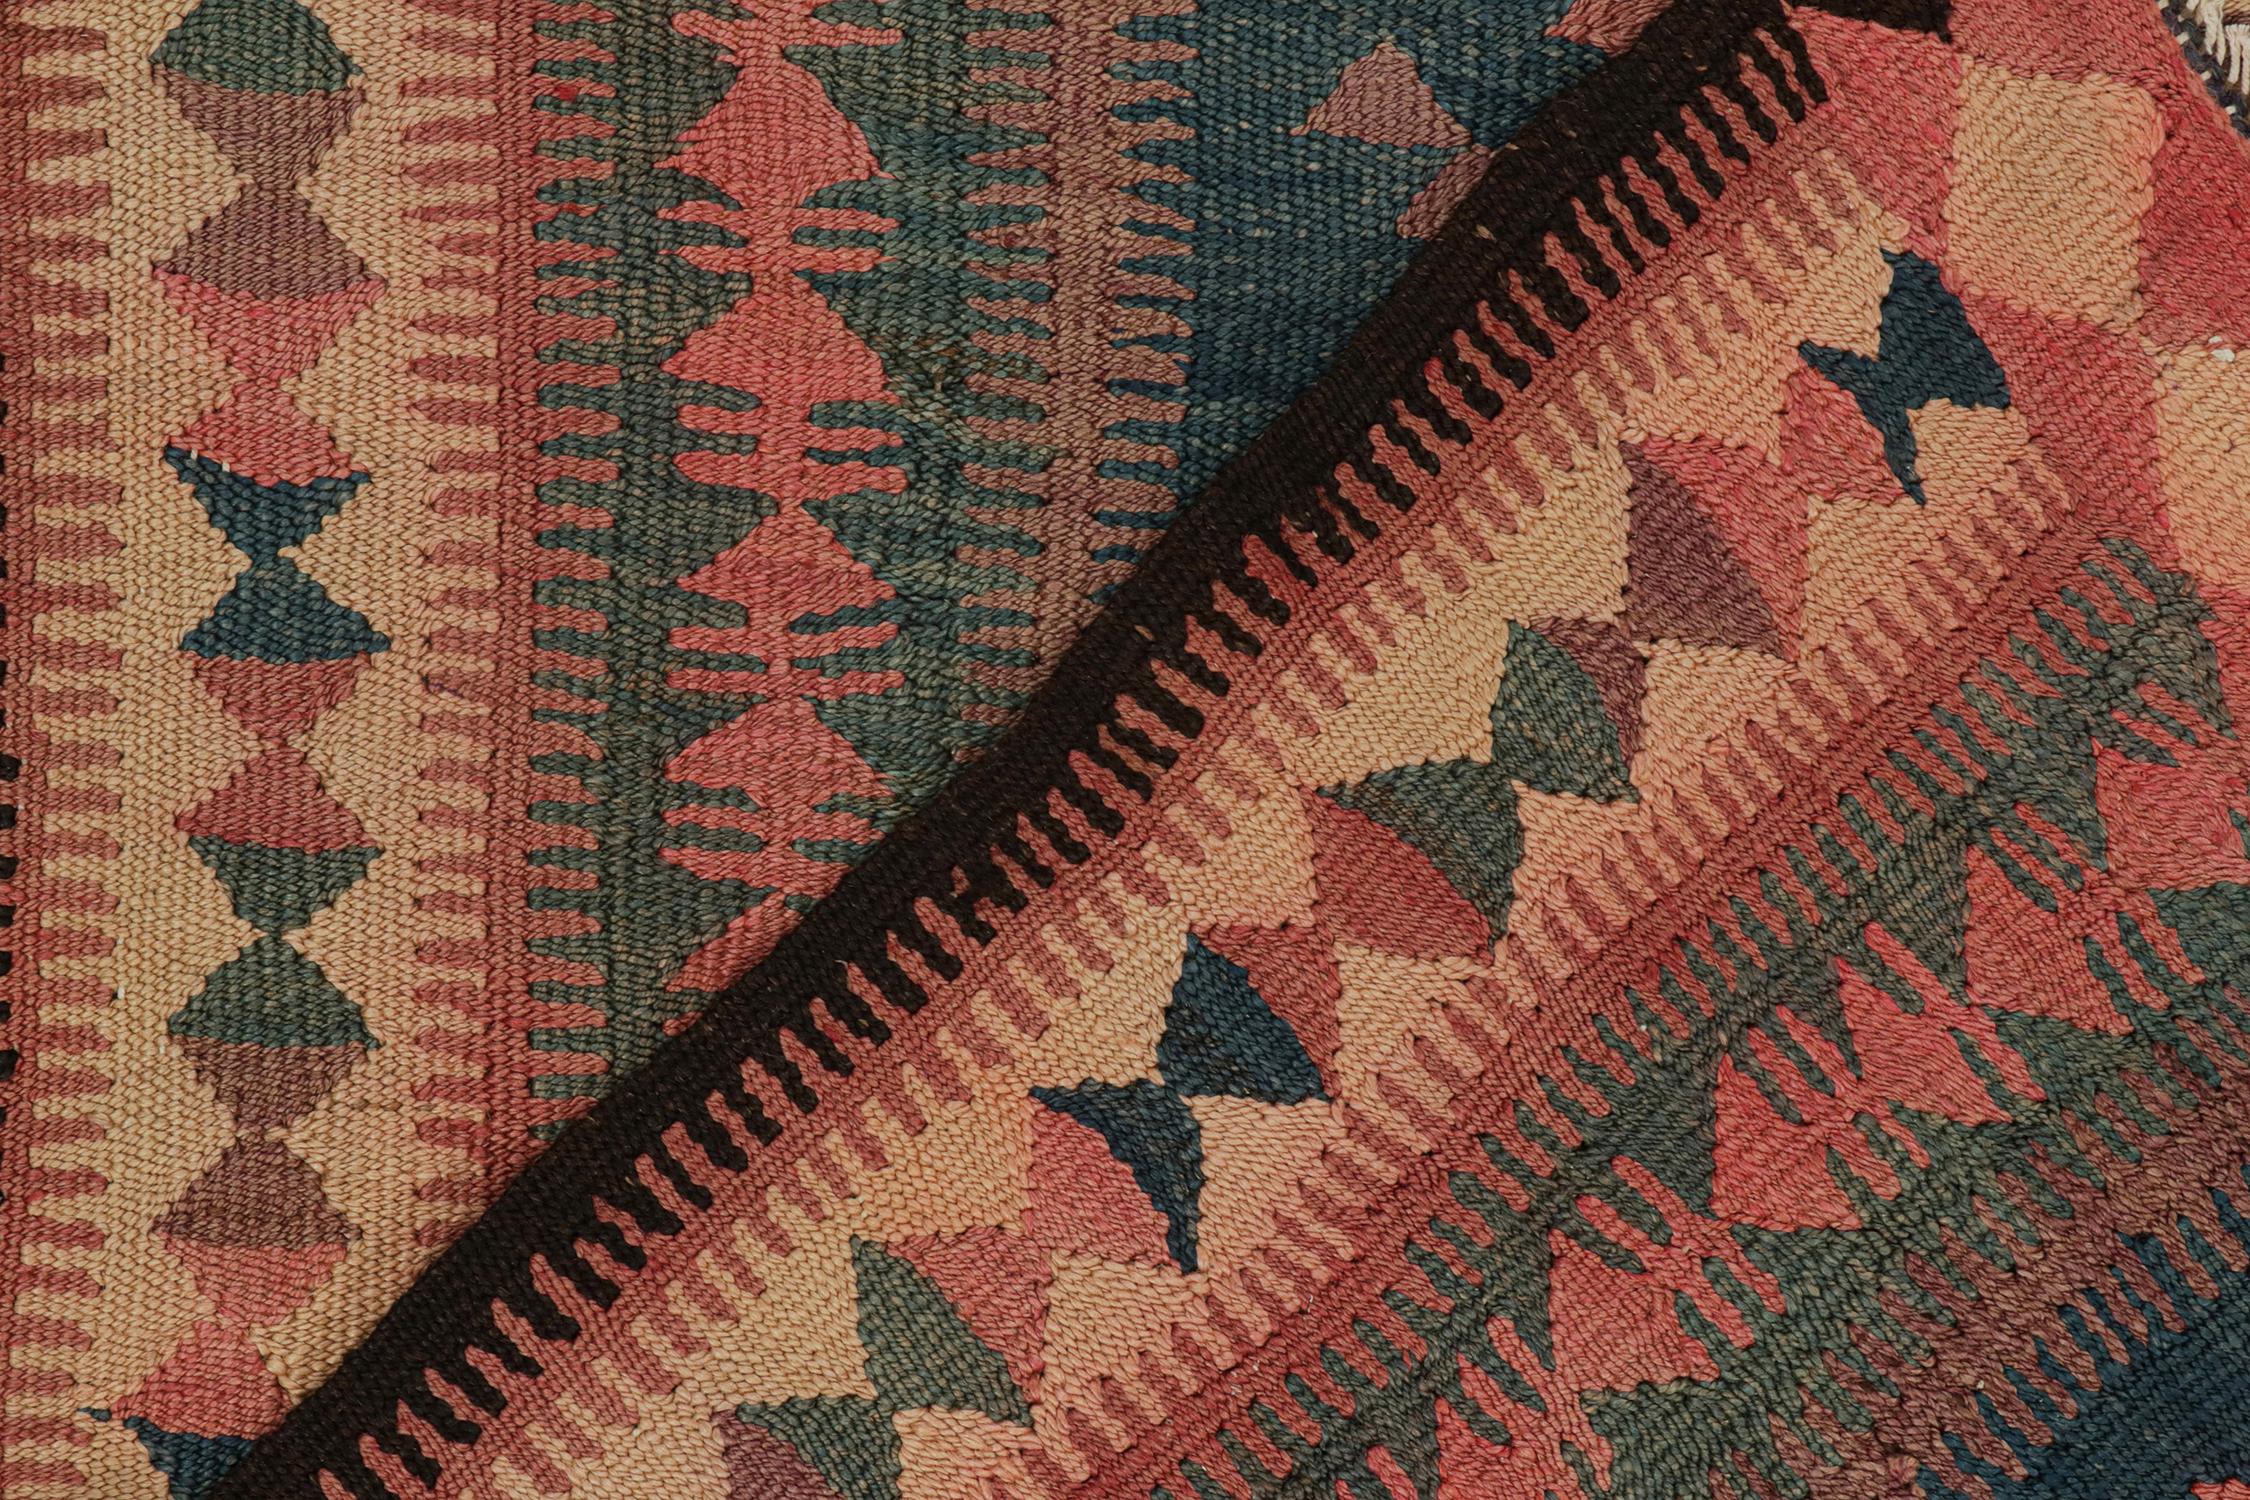 Vintage Kurdish Persian Kilim in Blue and Red Geometric Patterns by Rug & Kilim In Good Condition For Sale In Long Island City, NY